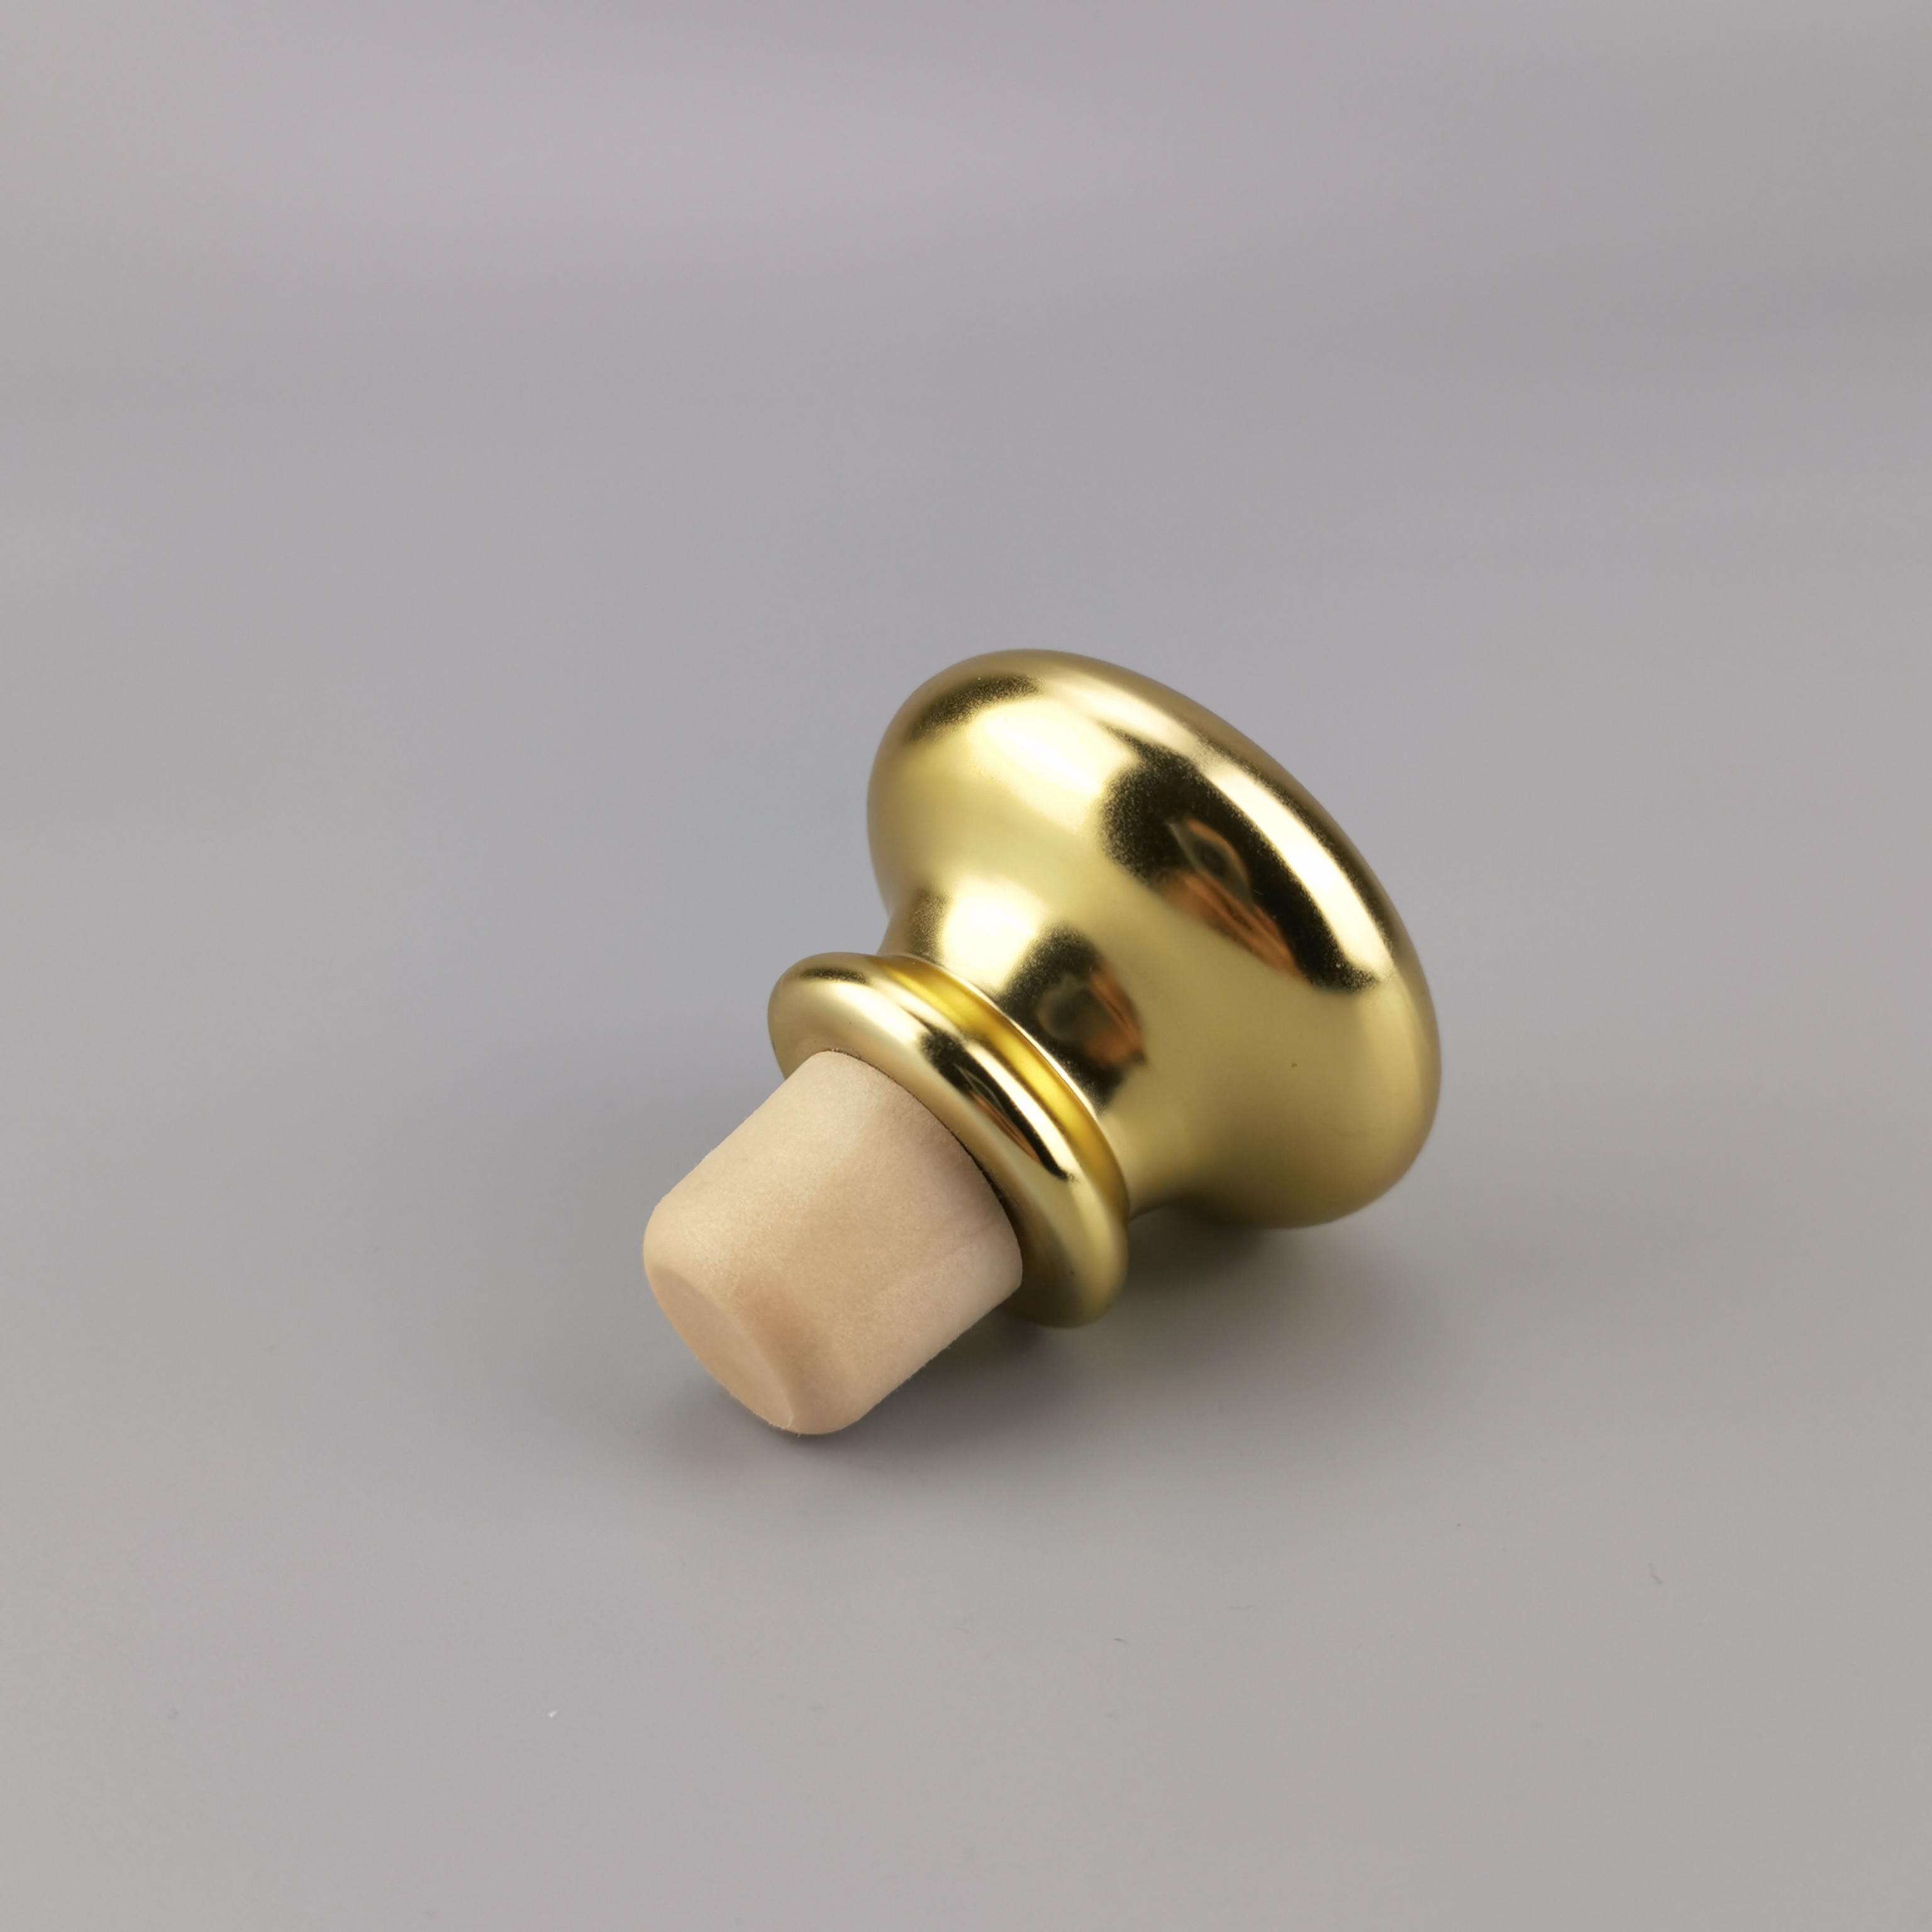 Metal Cap with Wooden Cork for Glass Packing 